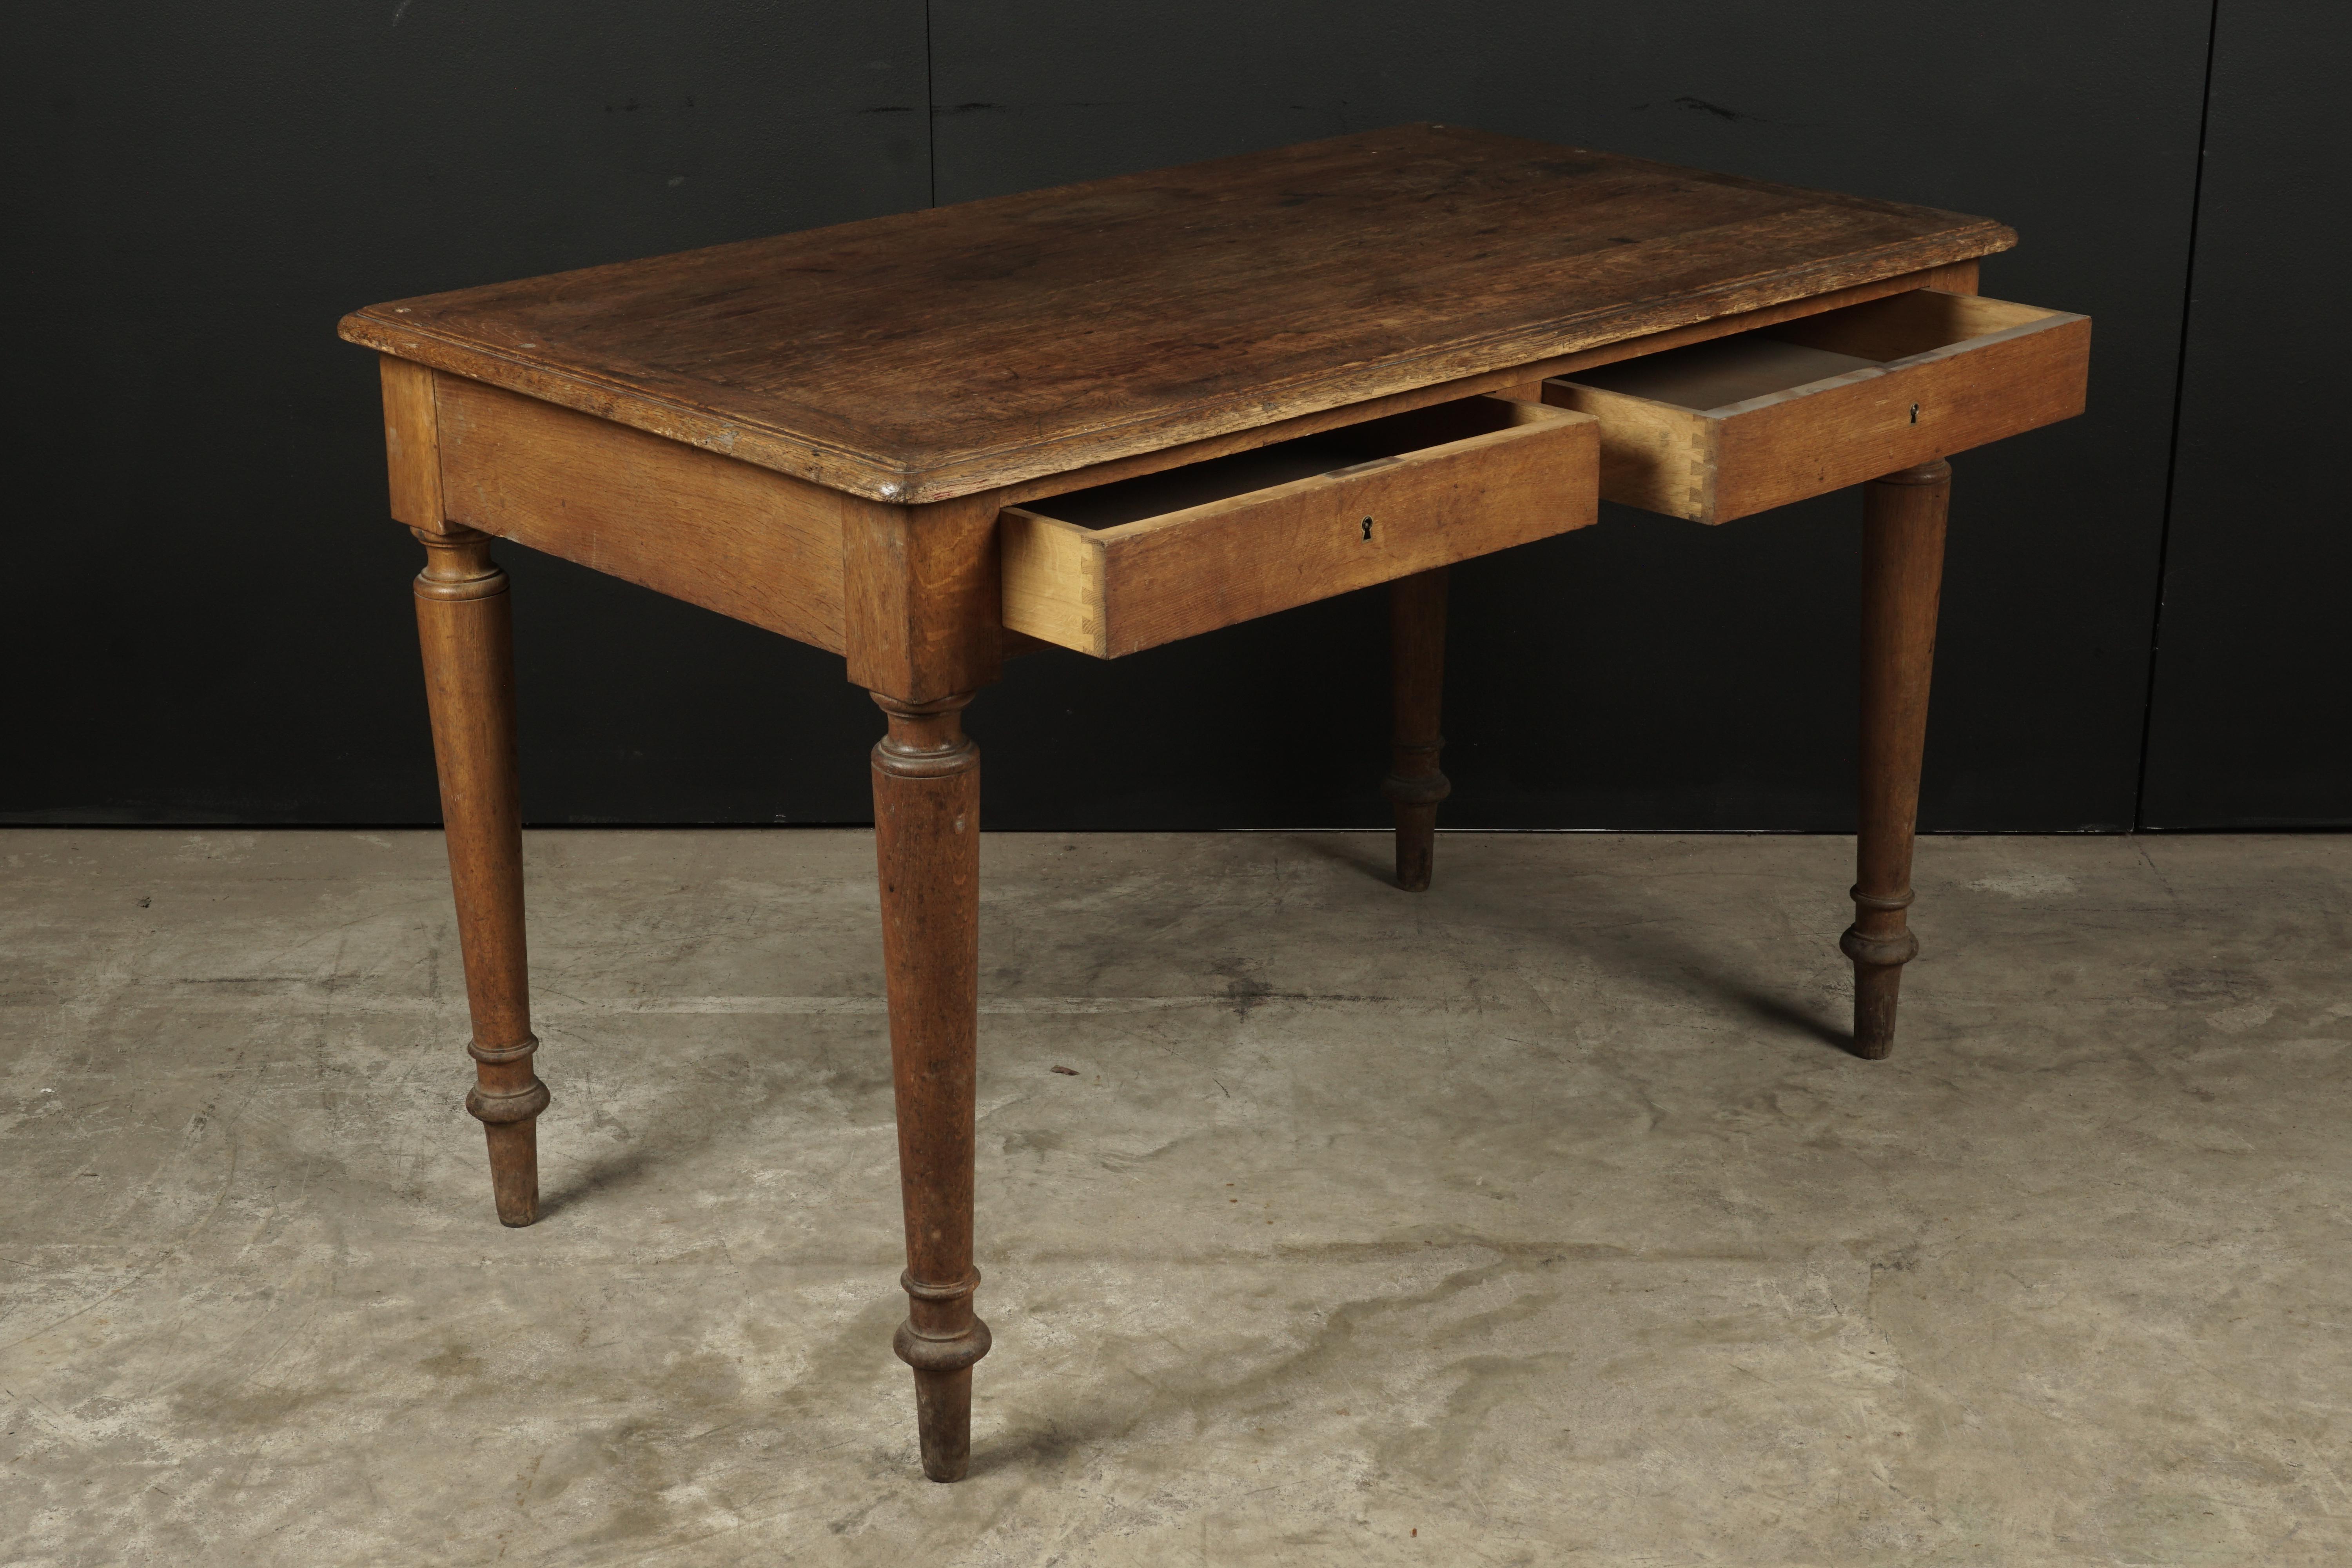 Oak bistro table from France, circa 1940. Solid oak construction with two drawers and baluster legs.